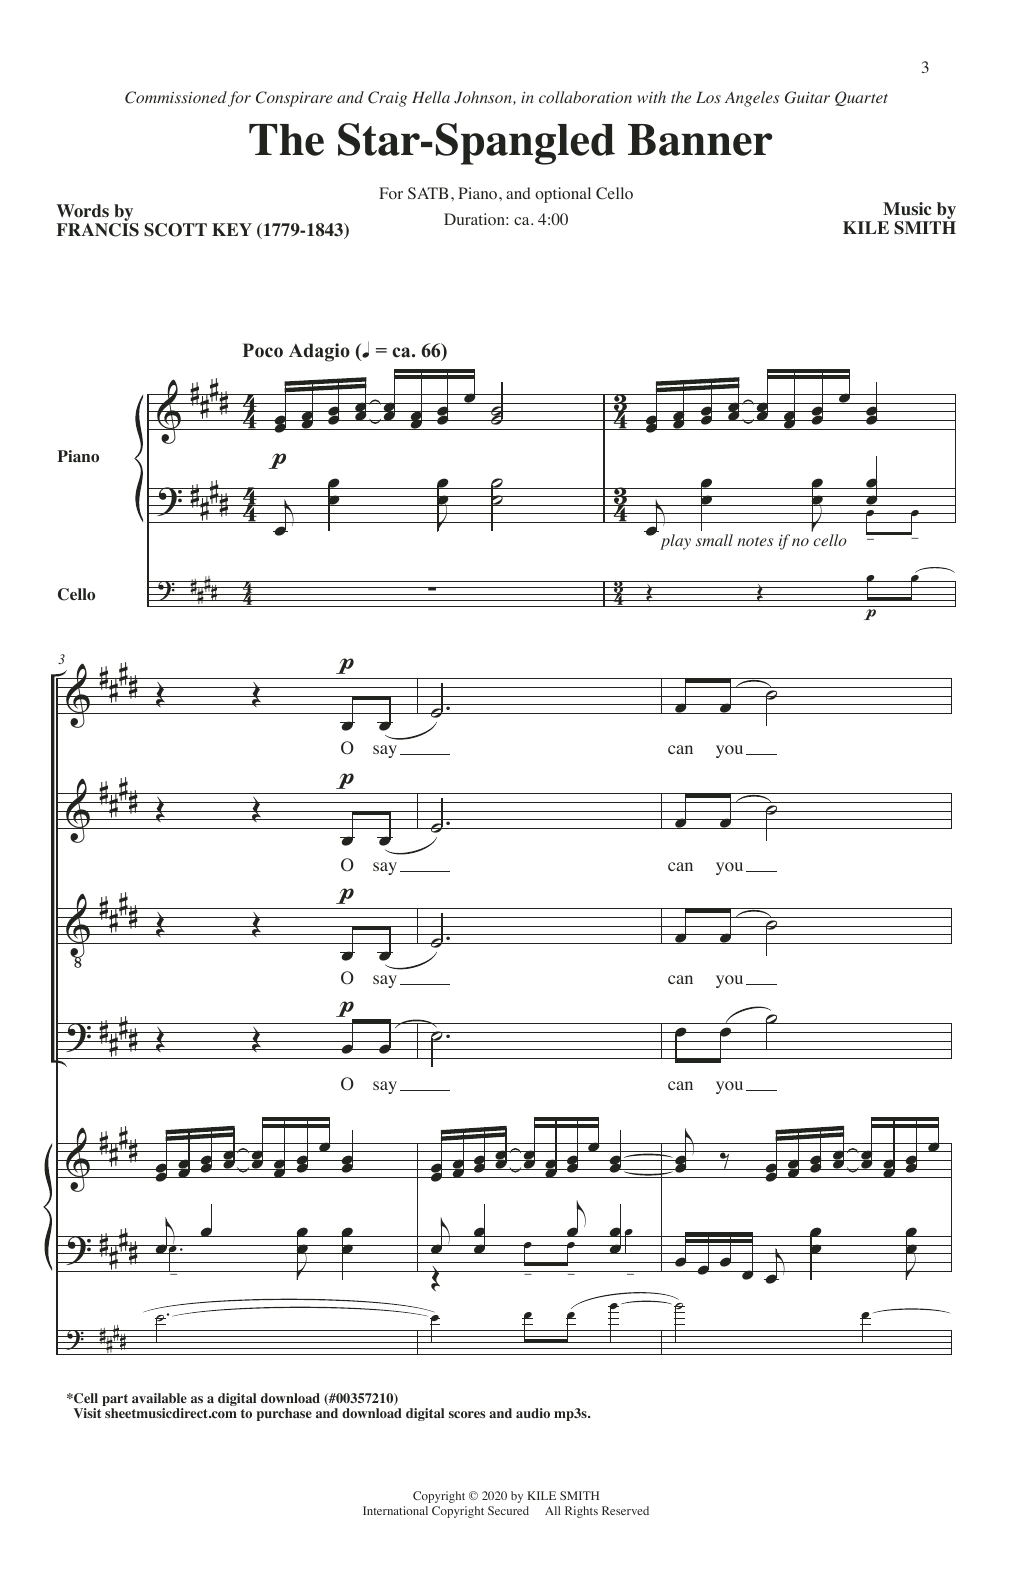 Francis Scott Key and Kile Smith The Star-Spangled Banner sheet music notes and chords arranged for SATB Choir